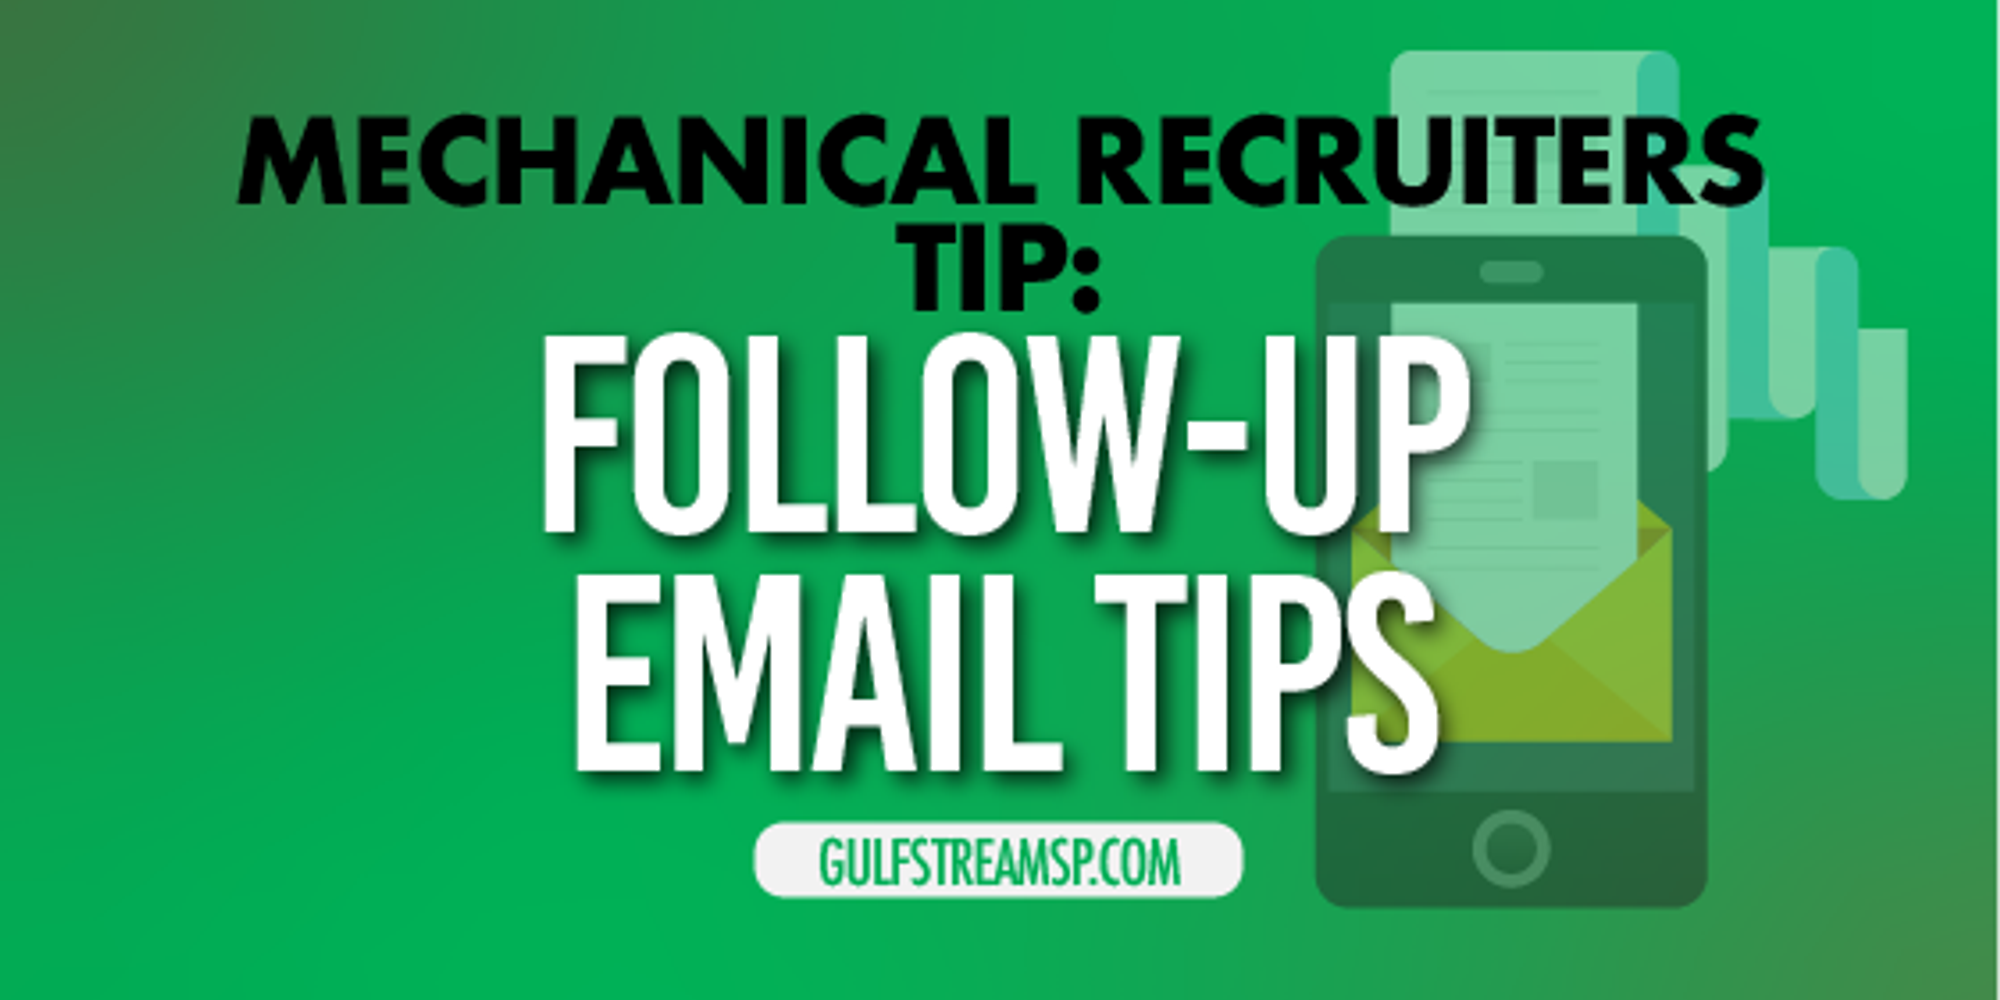 Keep Email Tips